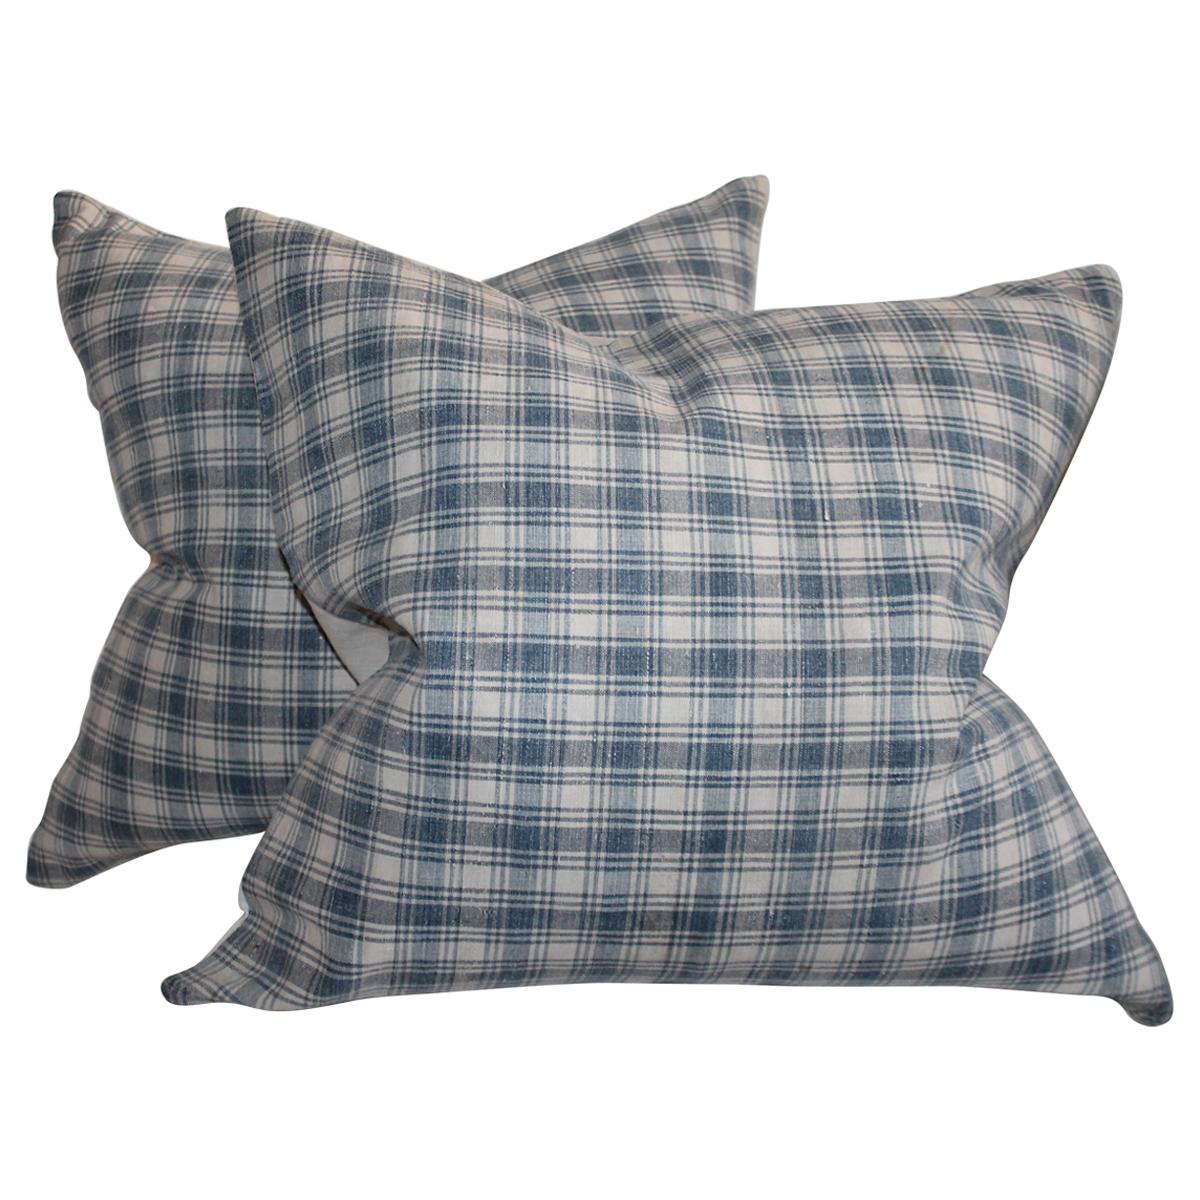 Early 19th Century Blue and White Homespun Linen Pillows, Pair For Sale